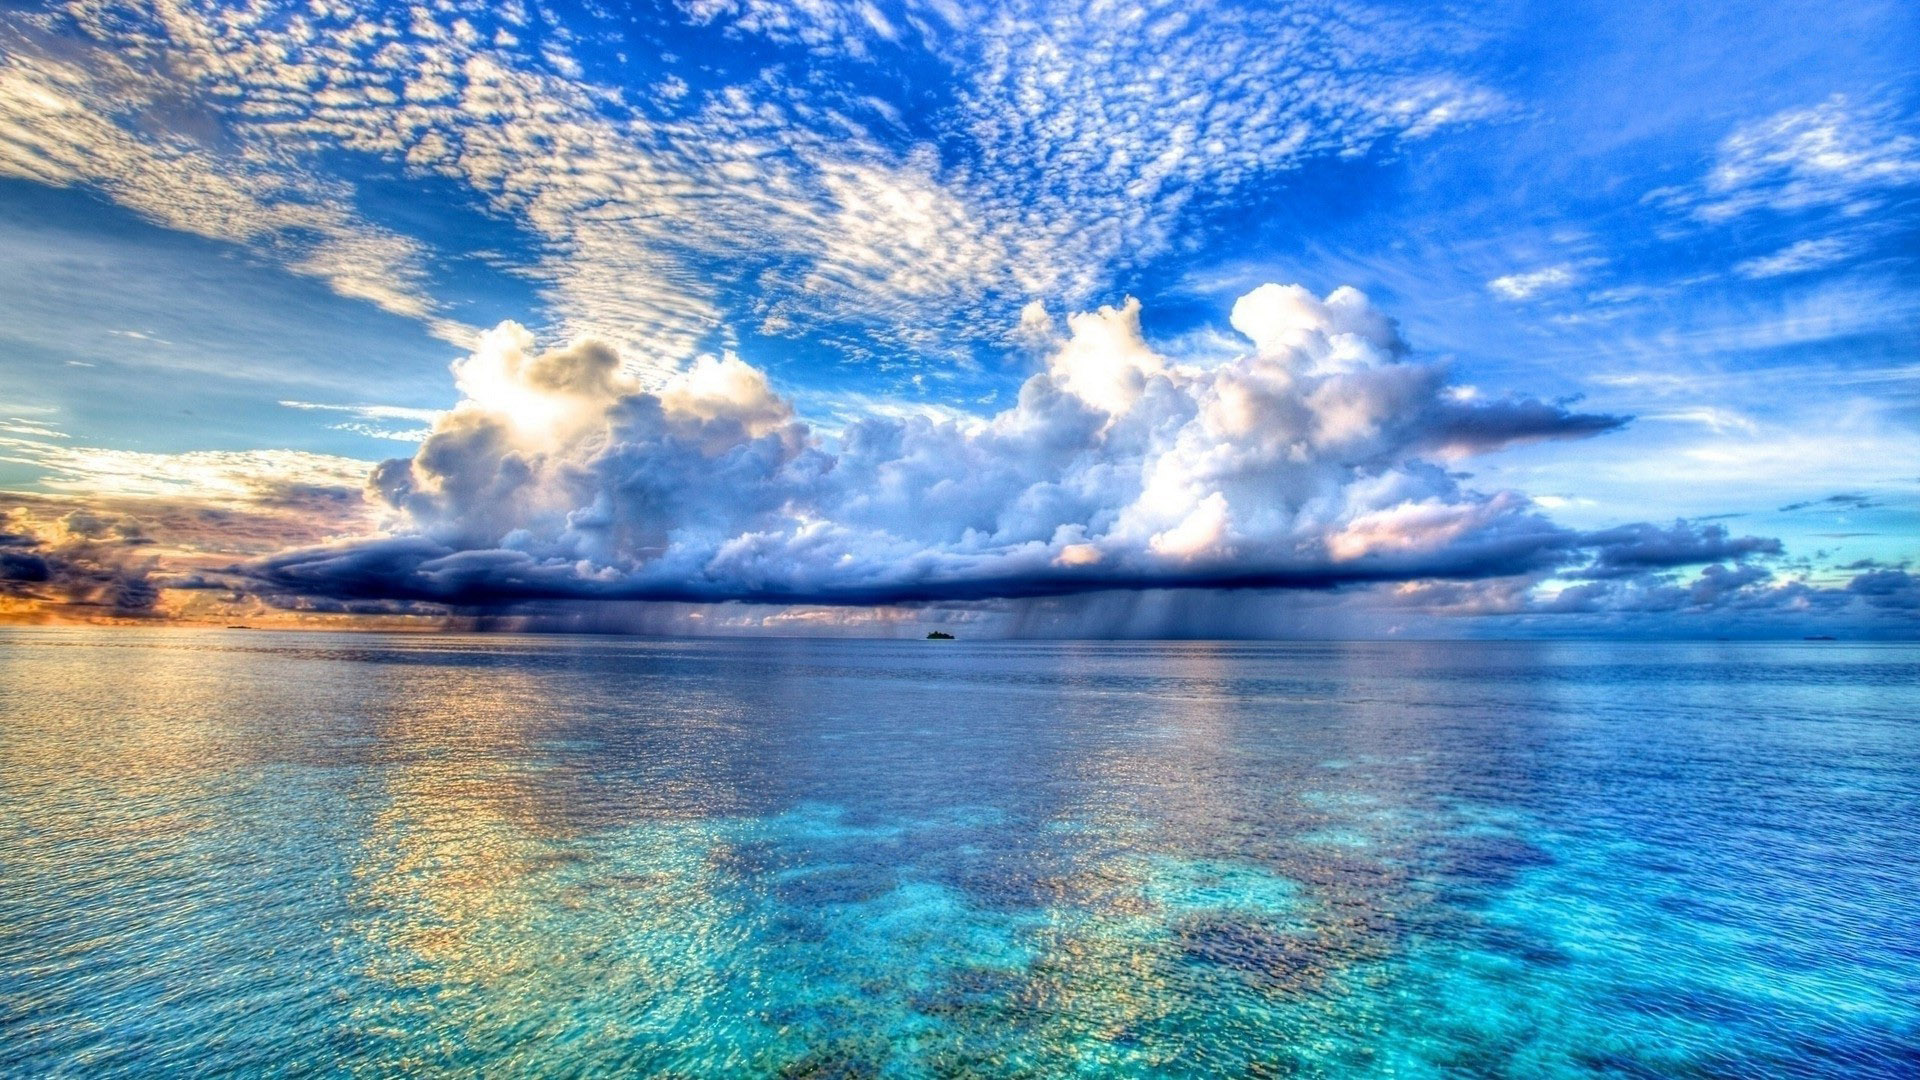 Beautiful Sky And Beach Wallpaper Download Wallpaper with 1920x1080